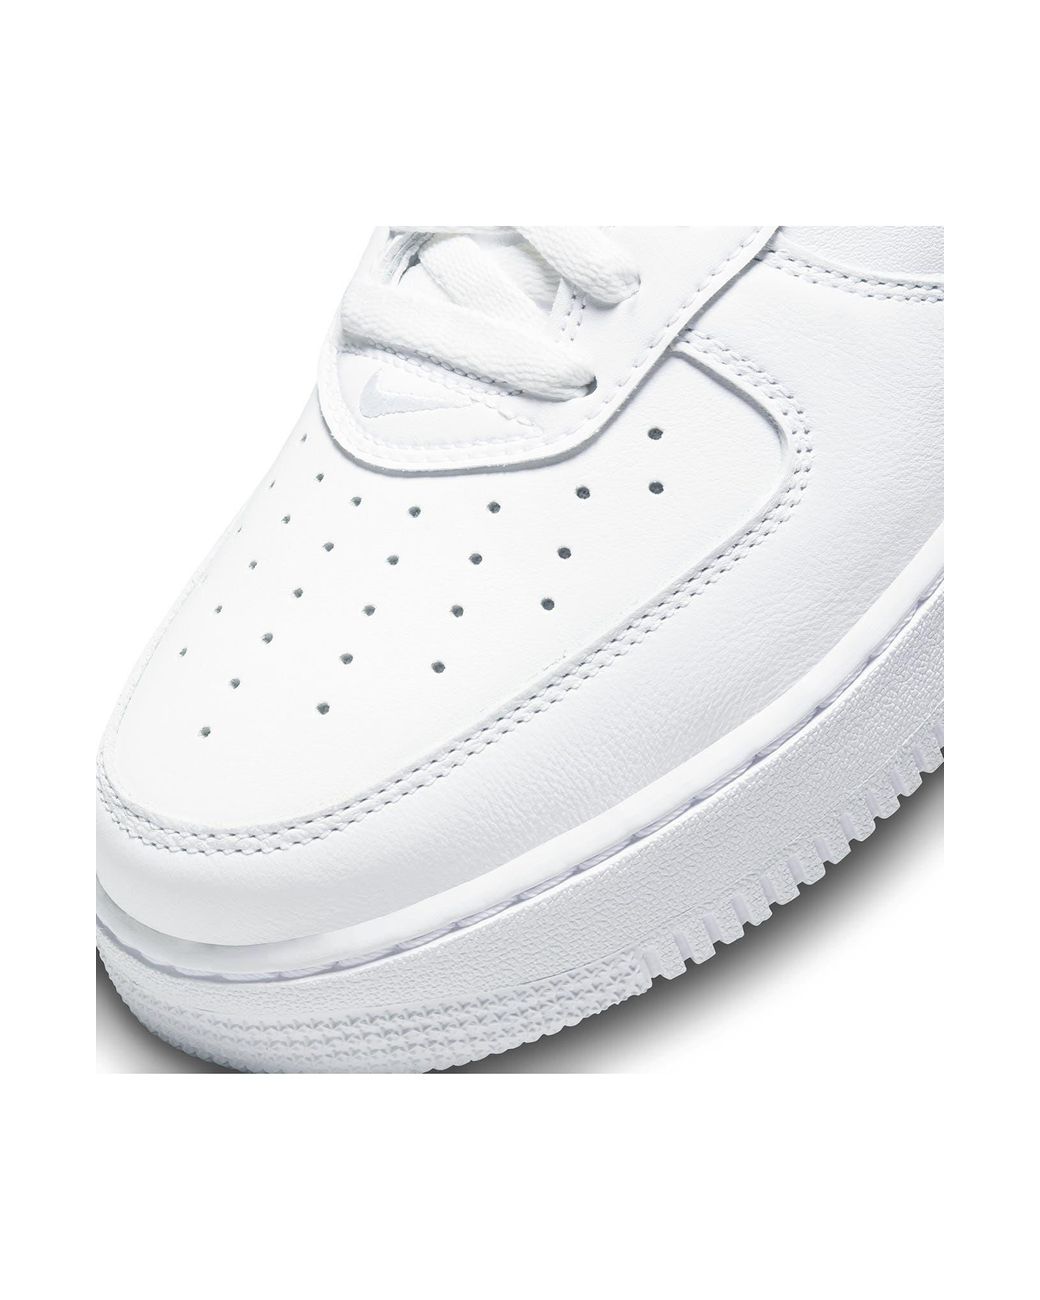 Nike Air Force 1 Low Retro Qs Sneaker in White | Lyst